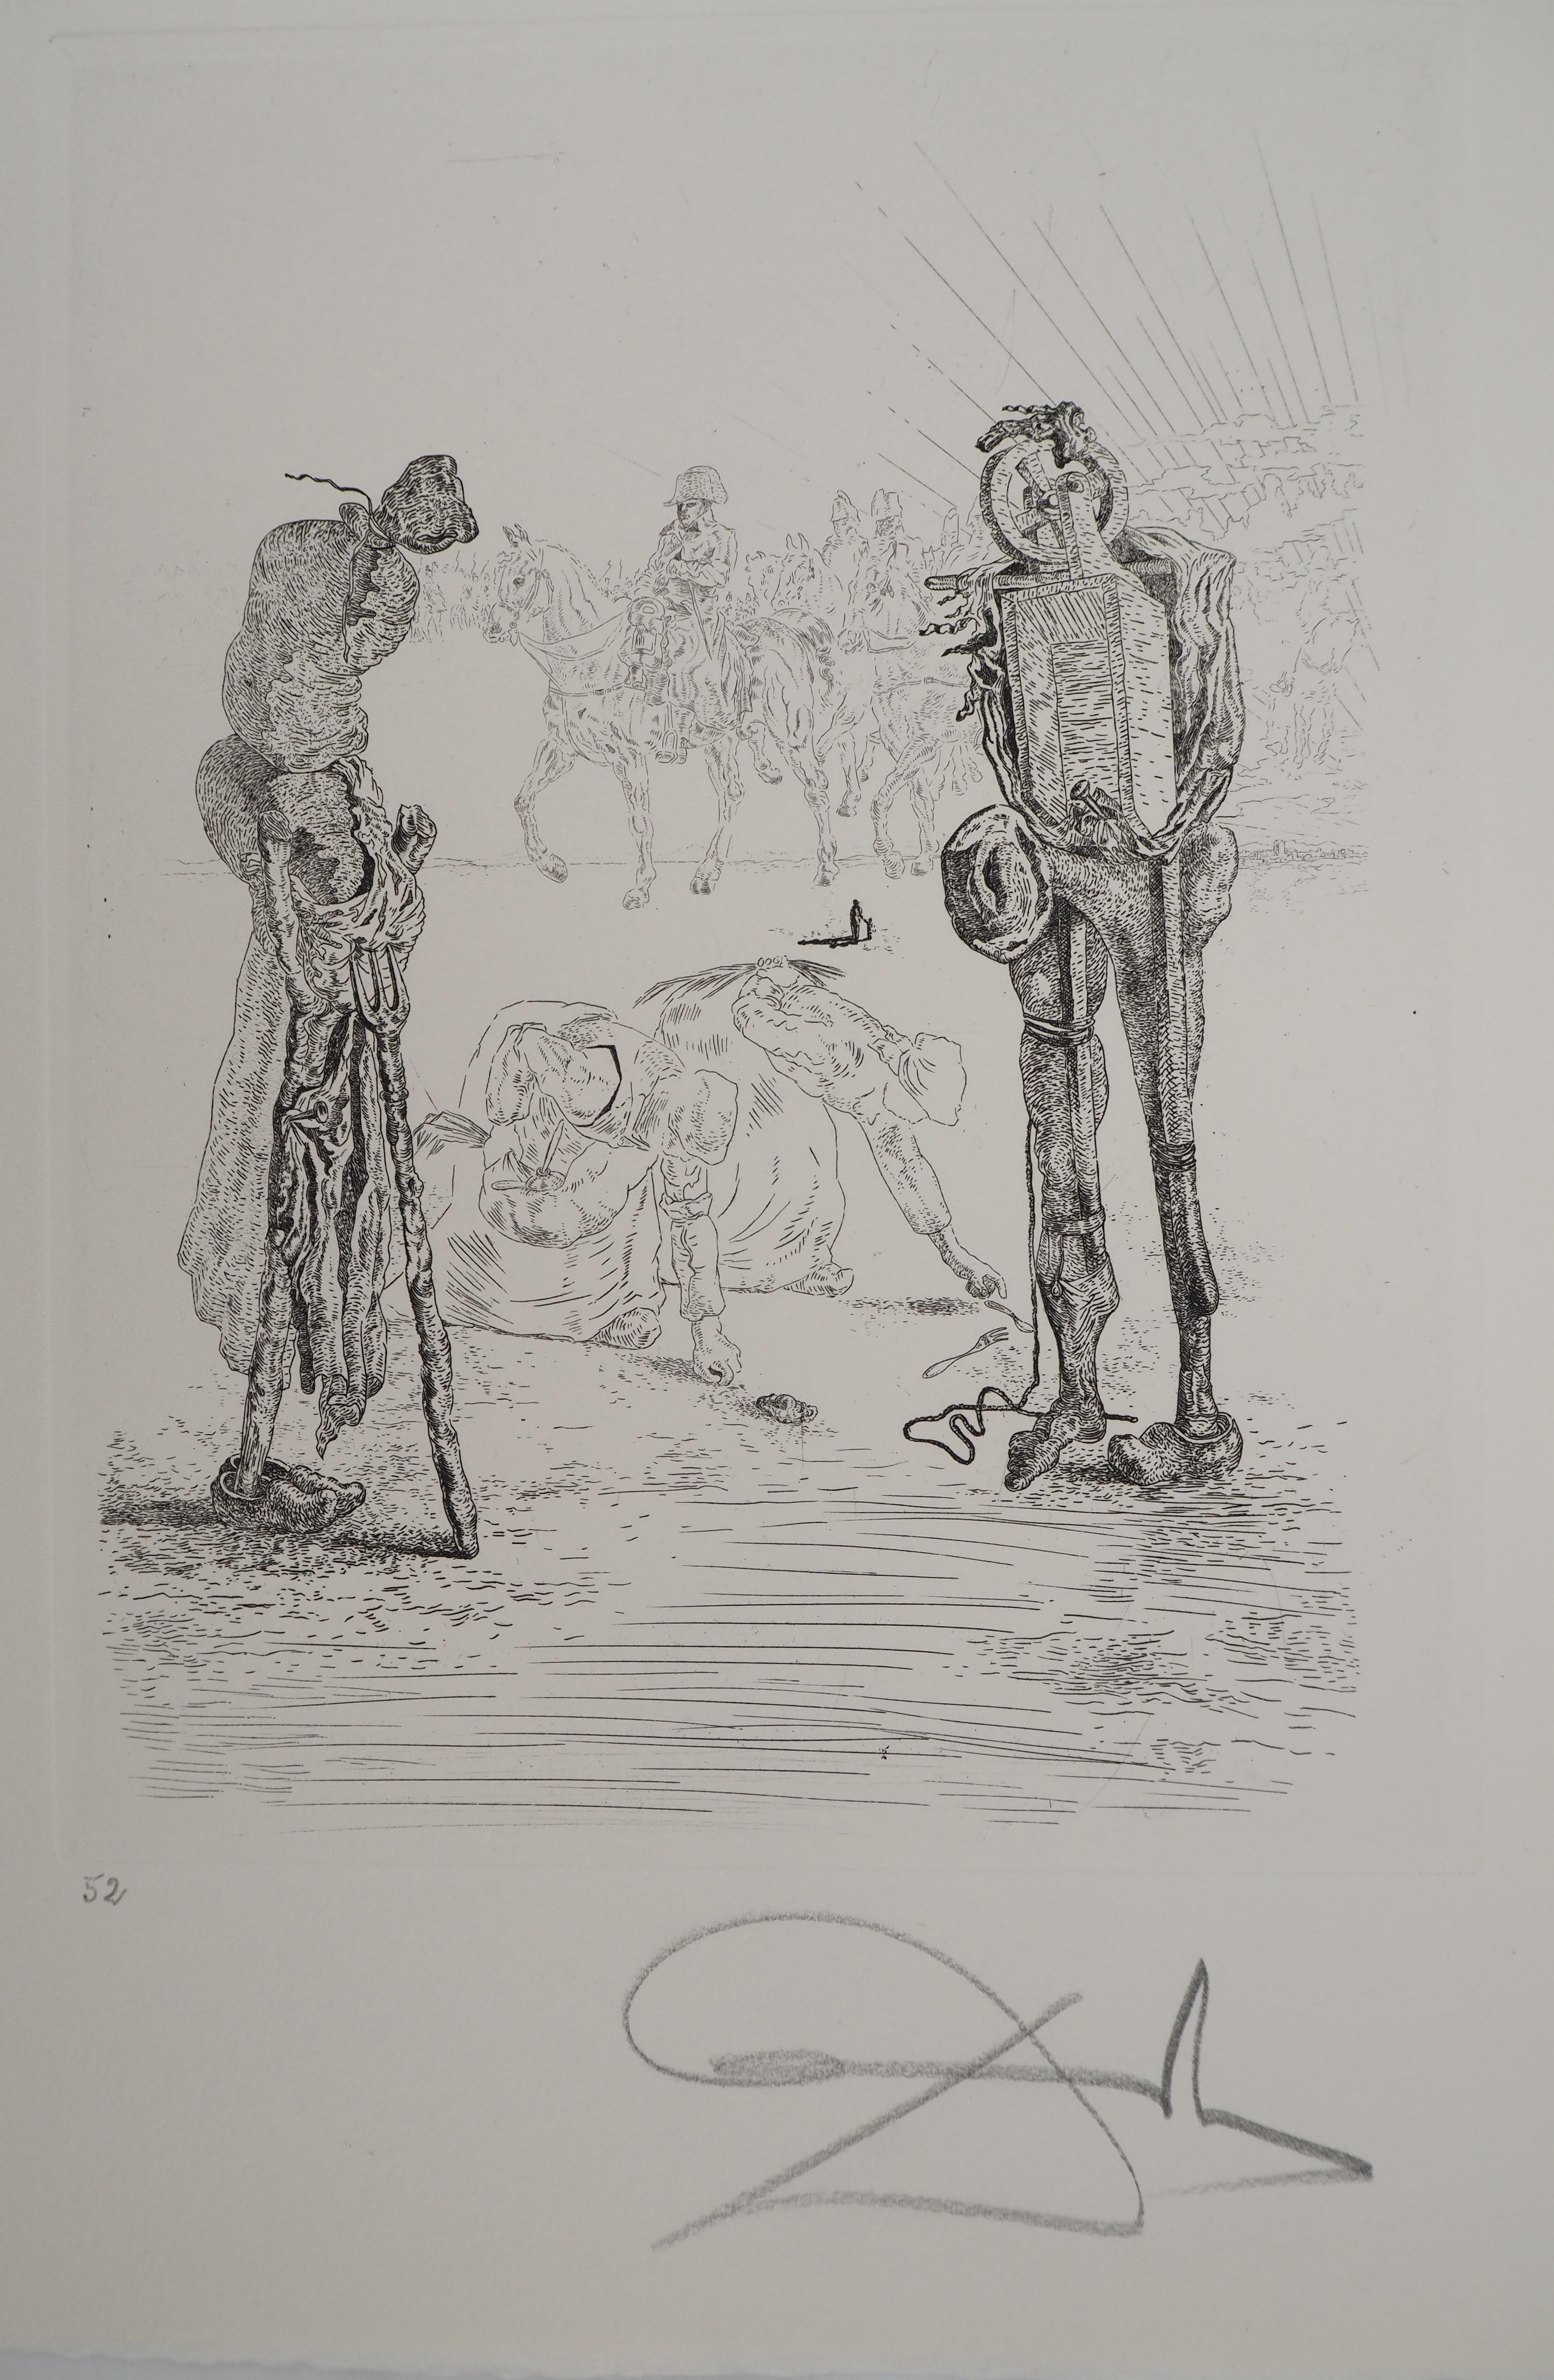 Emperor : Napoleonic Troops Passing Through - Original etching, HANDSIGNED - Print by Salvador Dalí